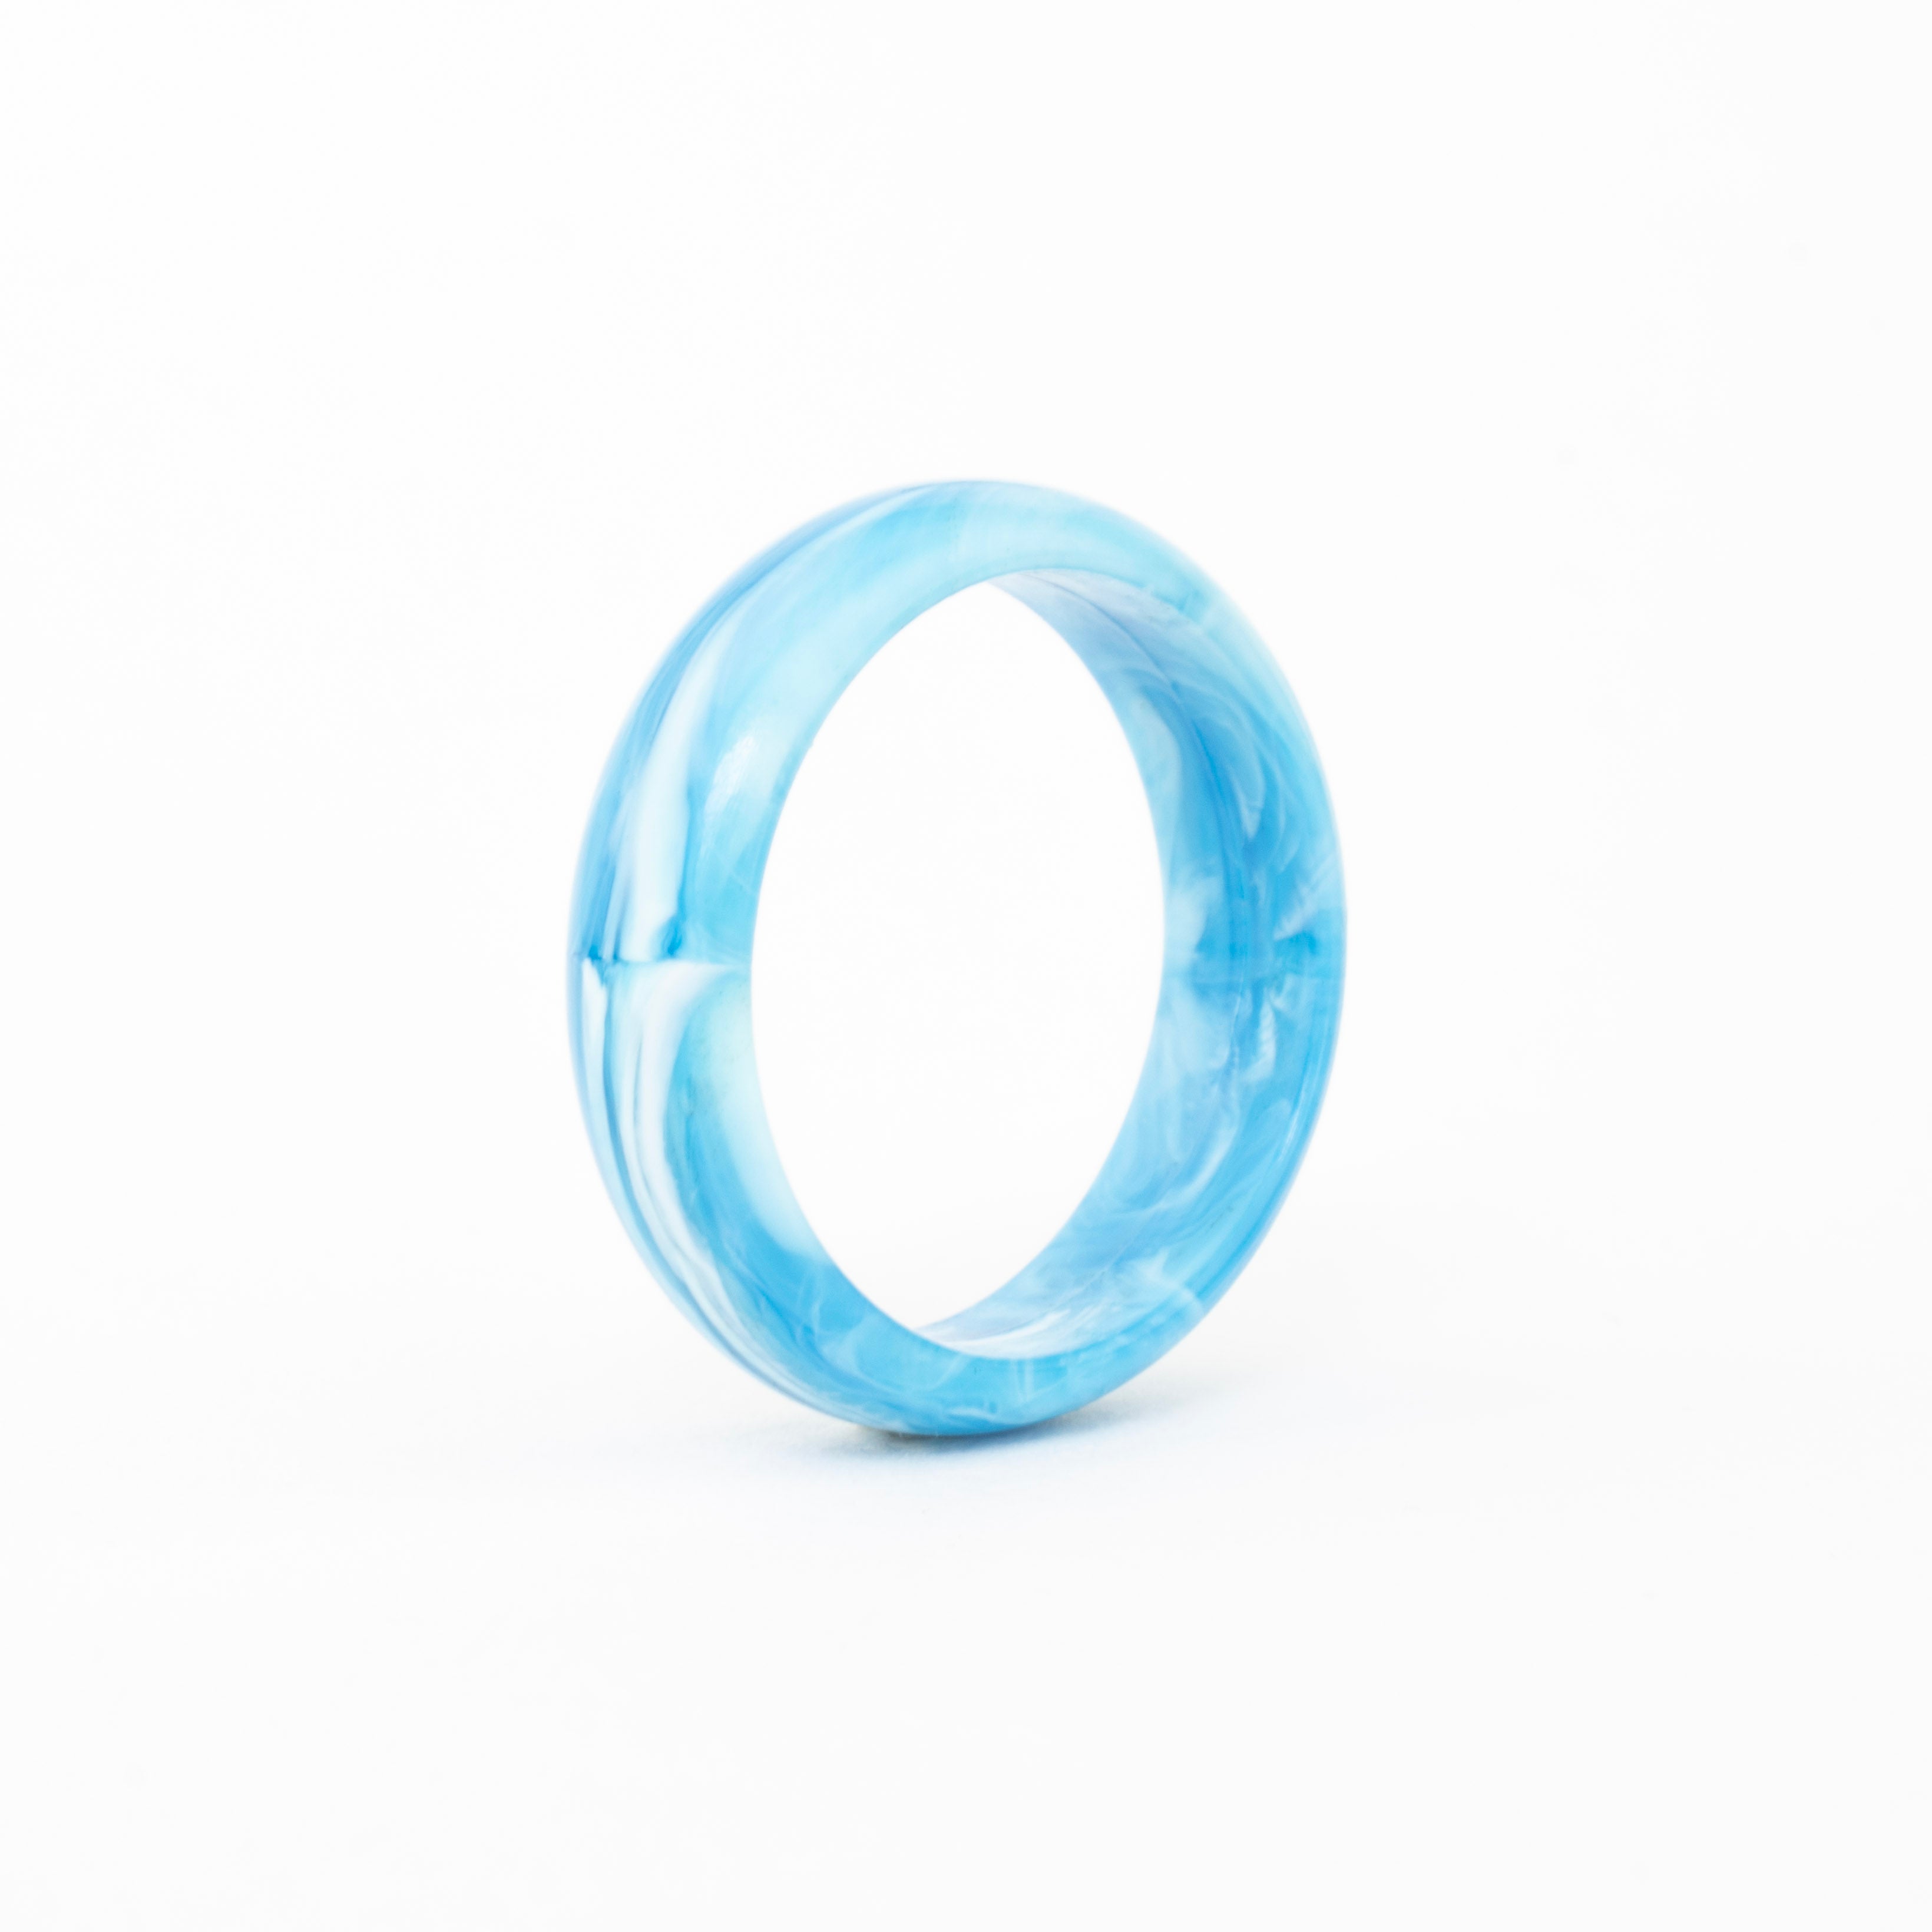 Rounded rings – Solus